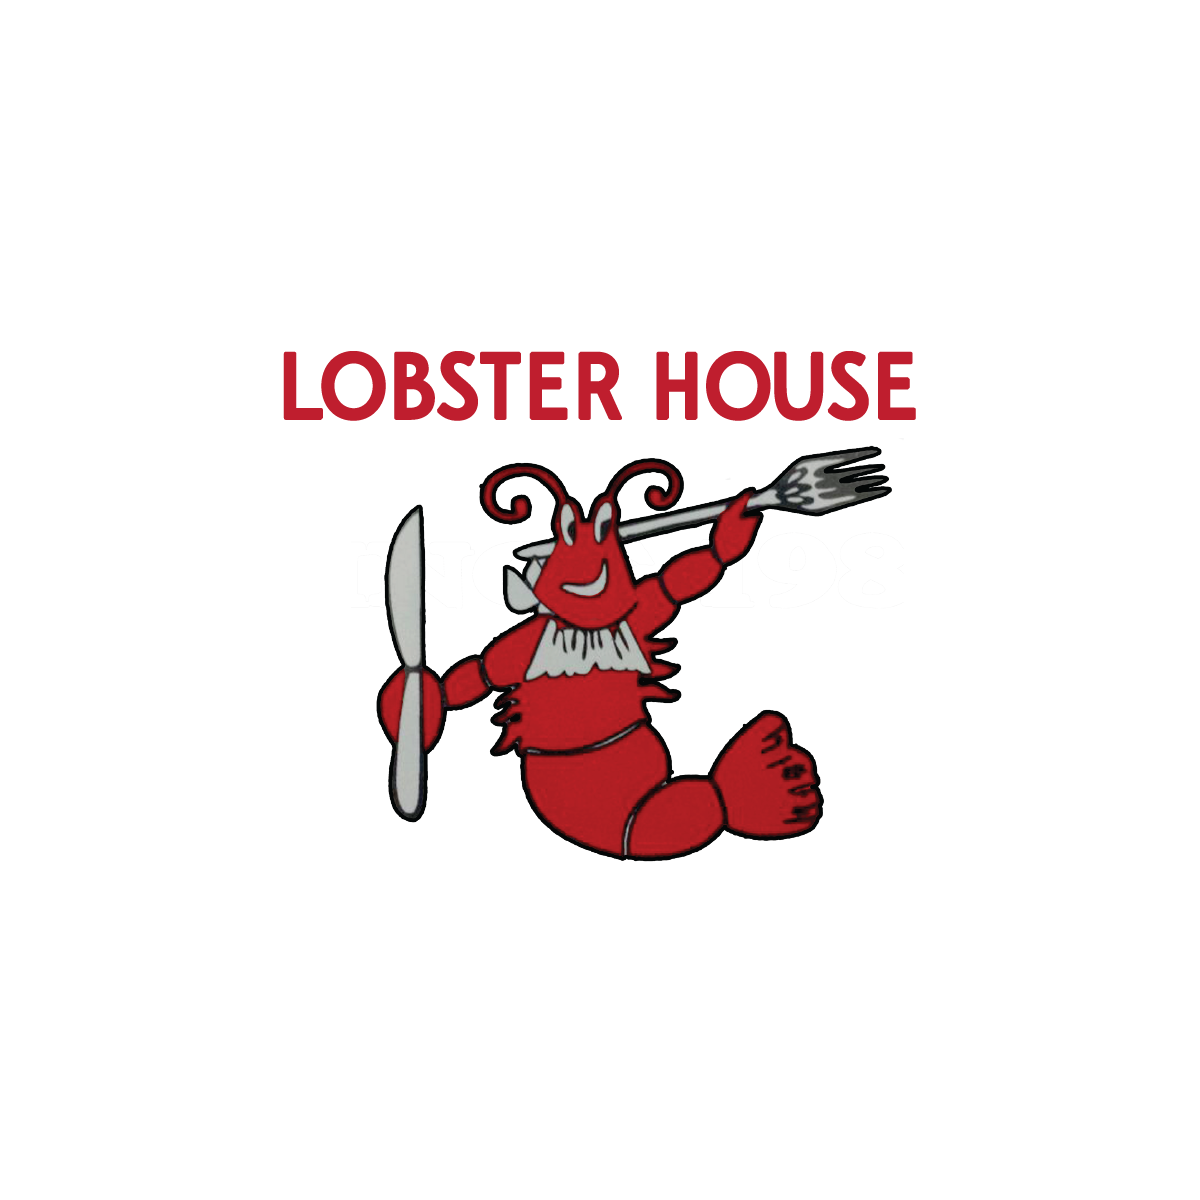 The Original Lobster House